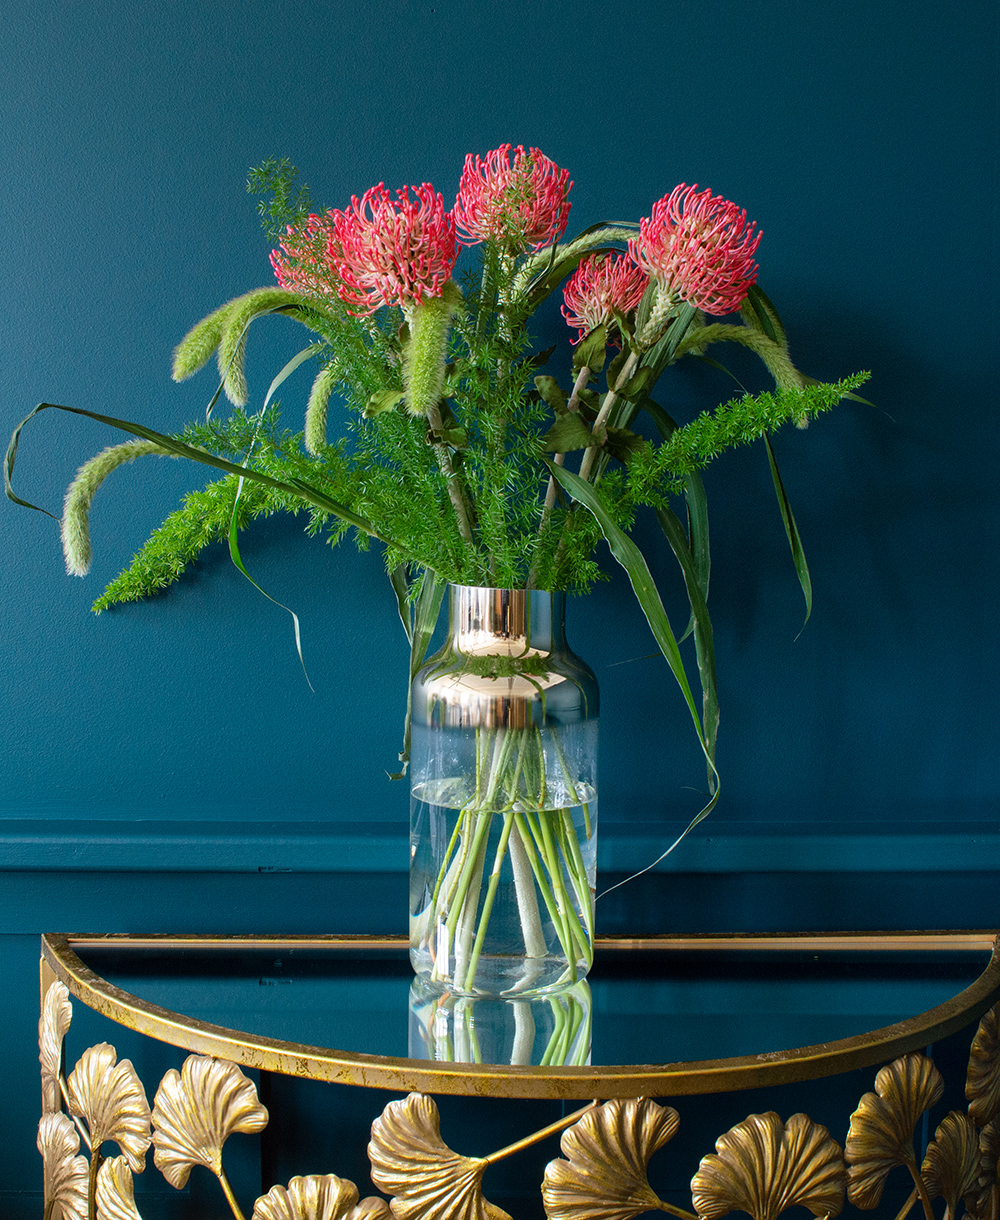 Tips for flower arranging - mix in artificial flowers like these pink protea stems